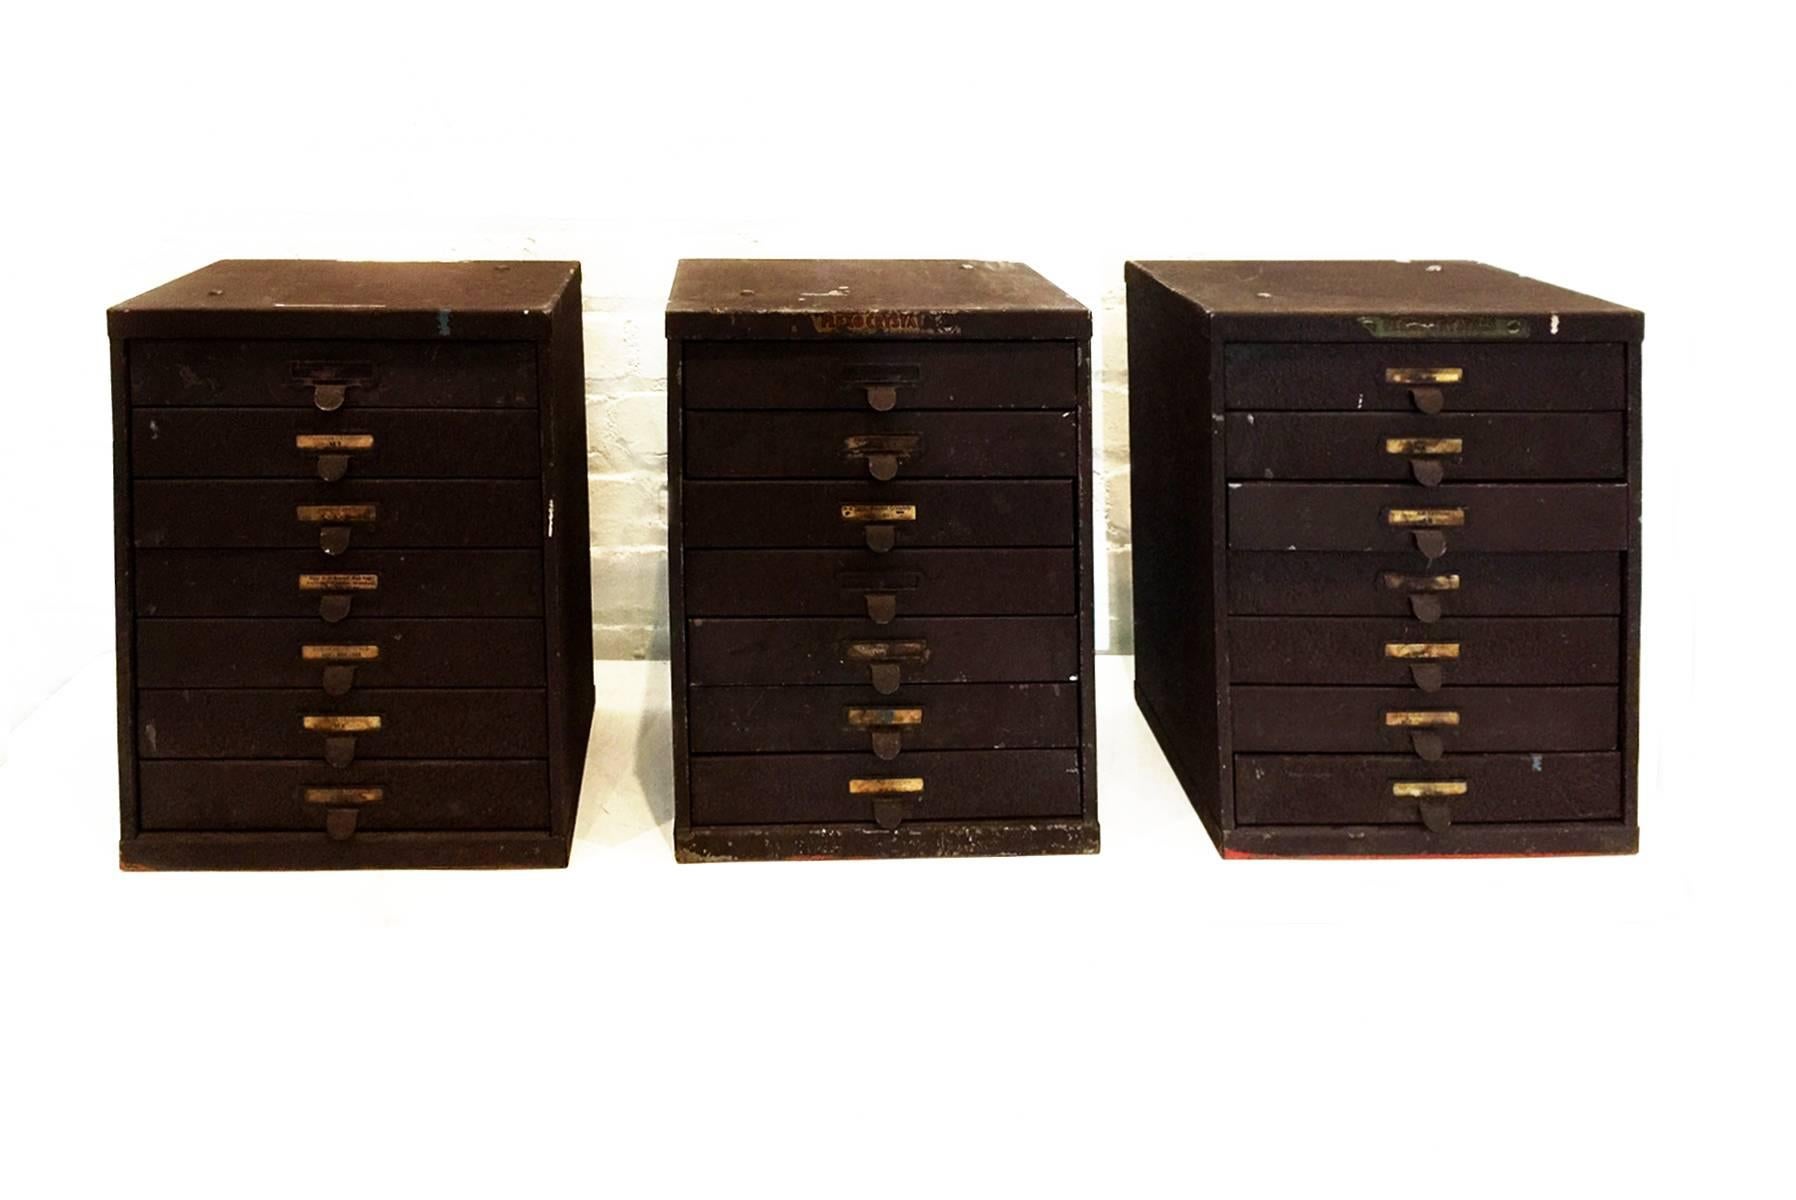 Vintage Germanow & Simon seven-drawer watchmaker's cabinet. Originally used to store G-S Flexo-Crystal watch replacement crystals. Great storage option for watch collectors, jewelry makers, artists & craftsman. 2 SOLD, 1 AVAILABLE.

Dimensions: